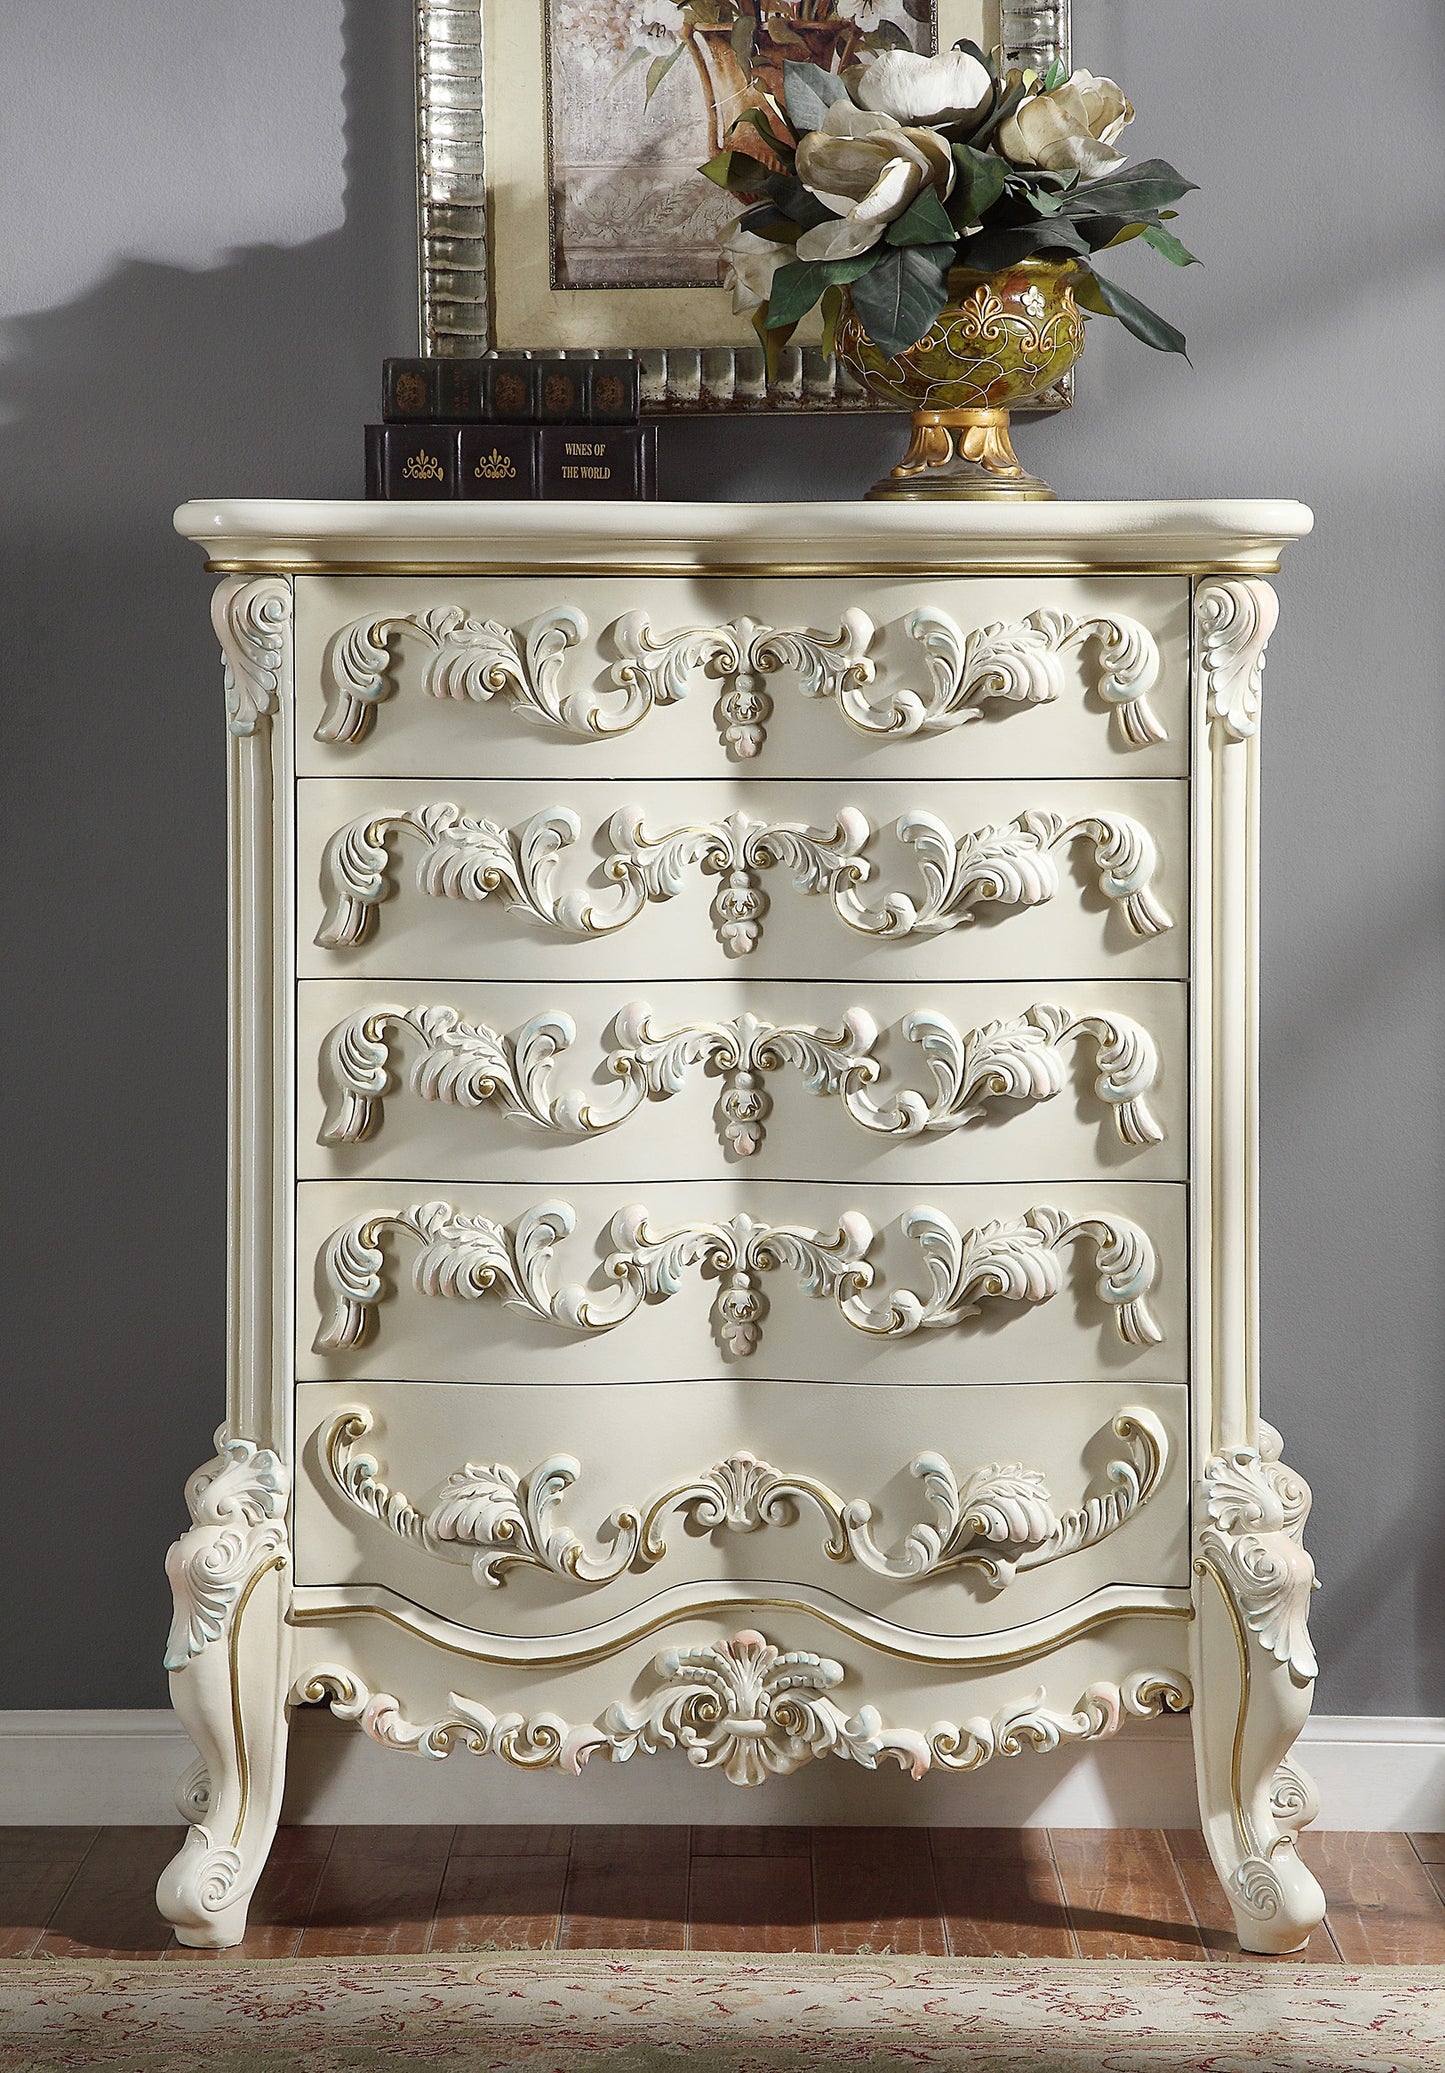 Chest in White Gloss Finish CHE8089 European Traditional Victorian